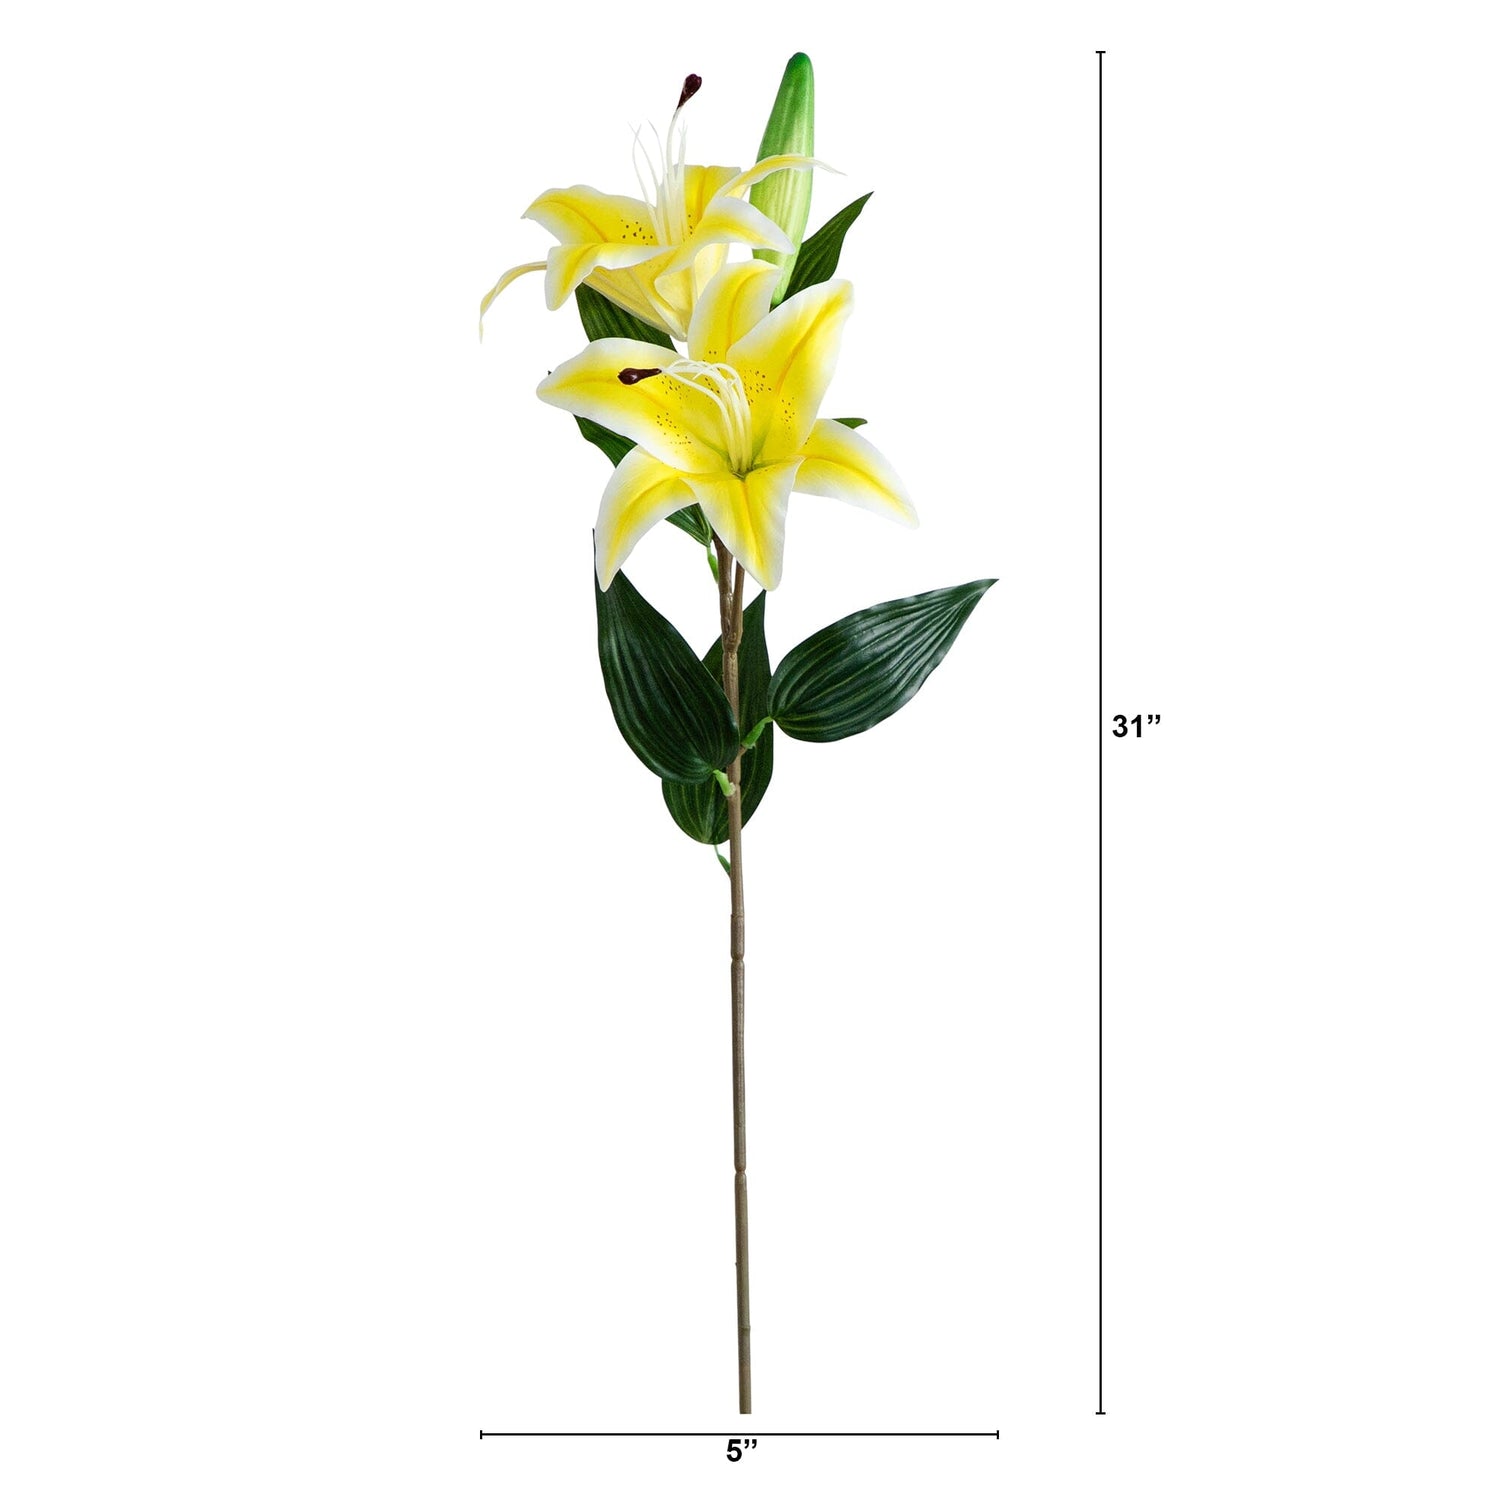 31" Artificial Lily Flower Stems - Set of 3